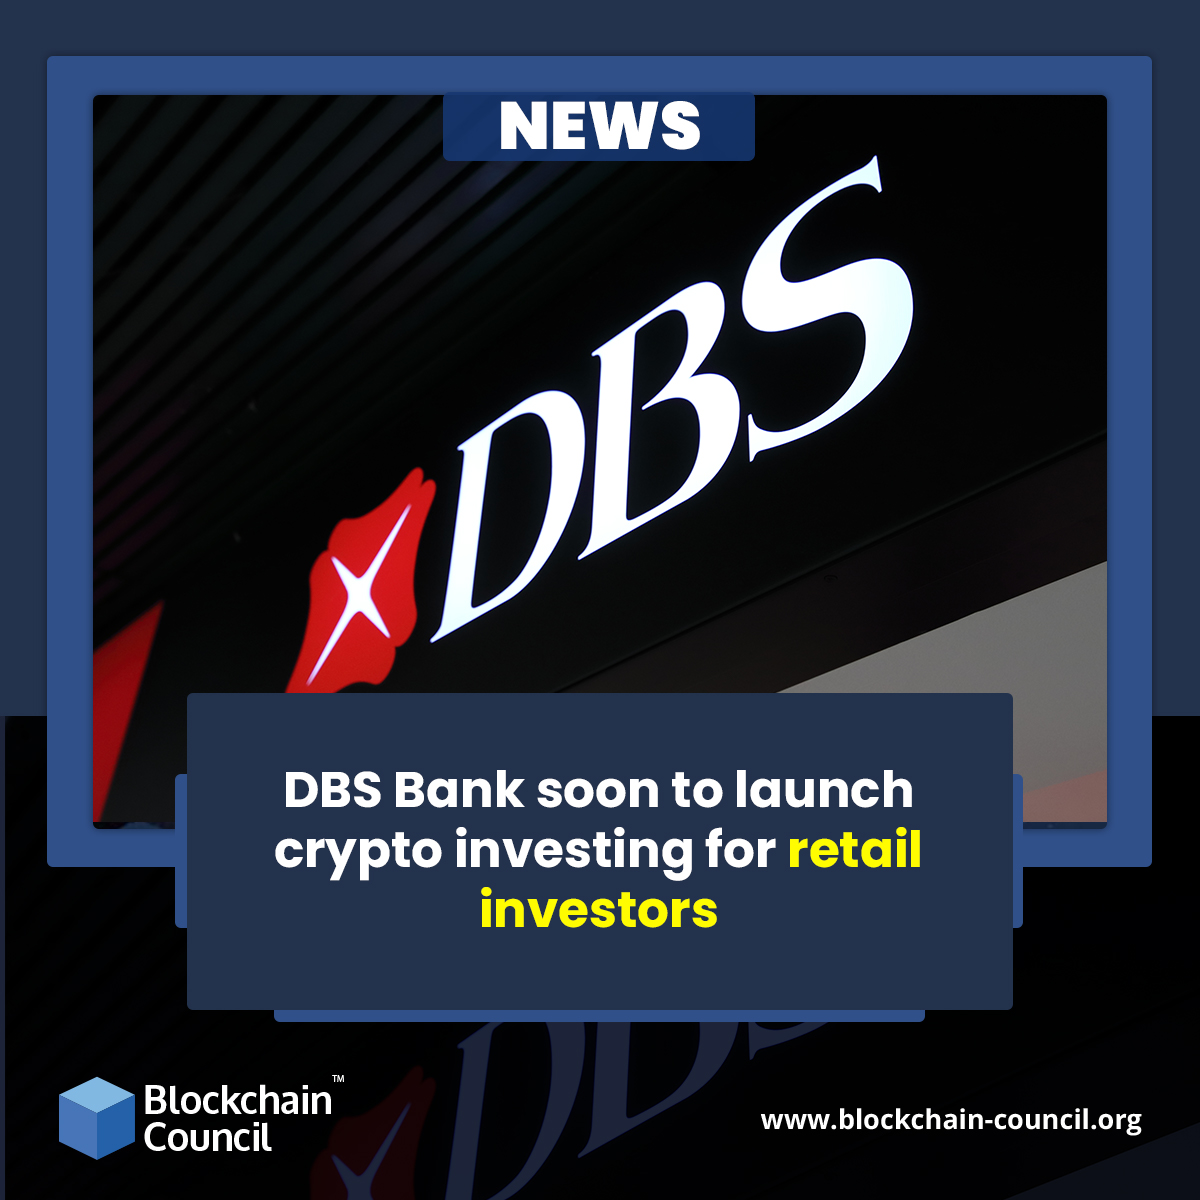 DBS Bank soon to launch crypto investing for retail investors